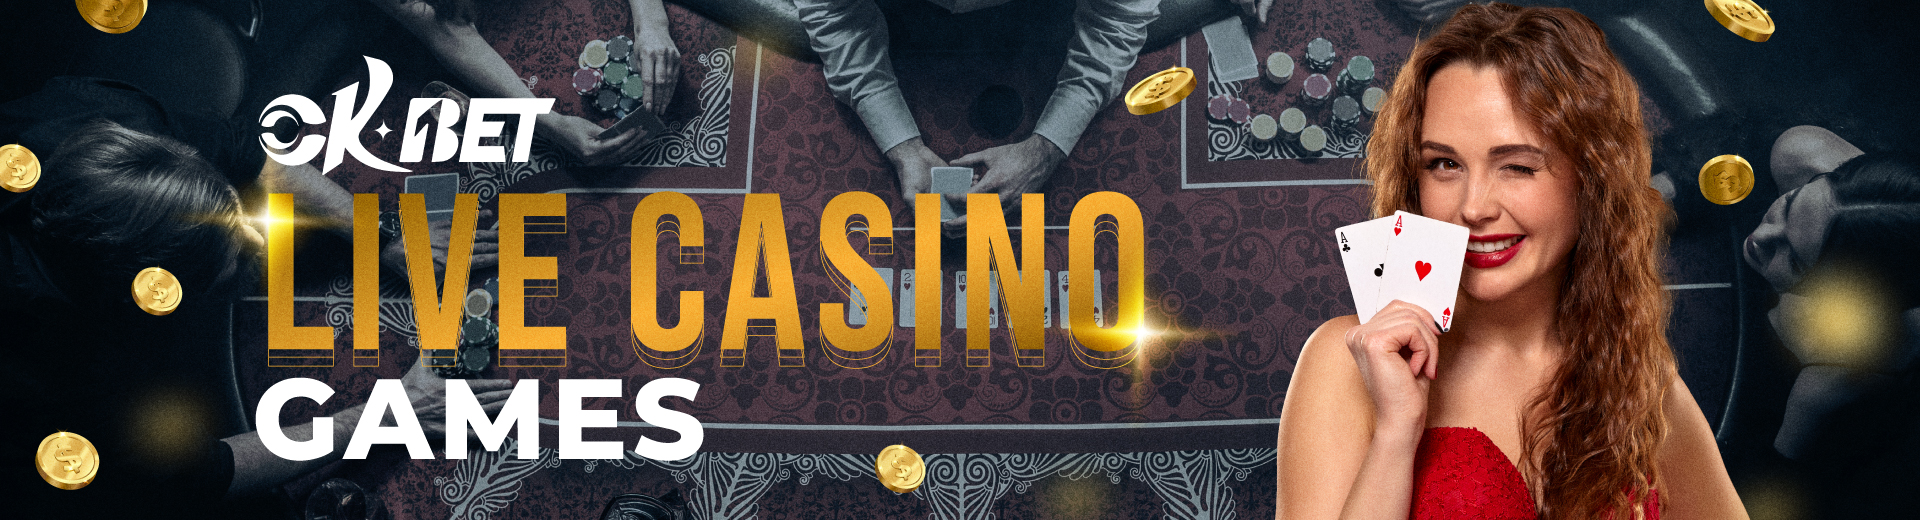 Play Live Casino Games Online in the Philippines